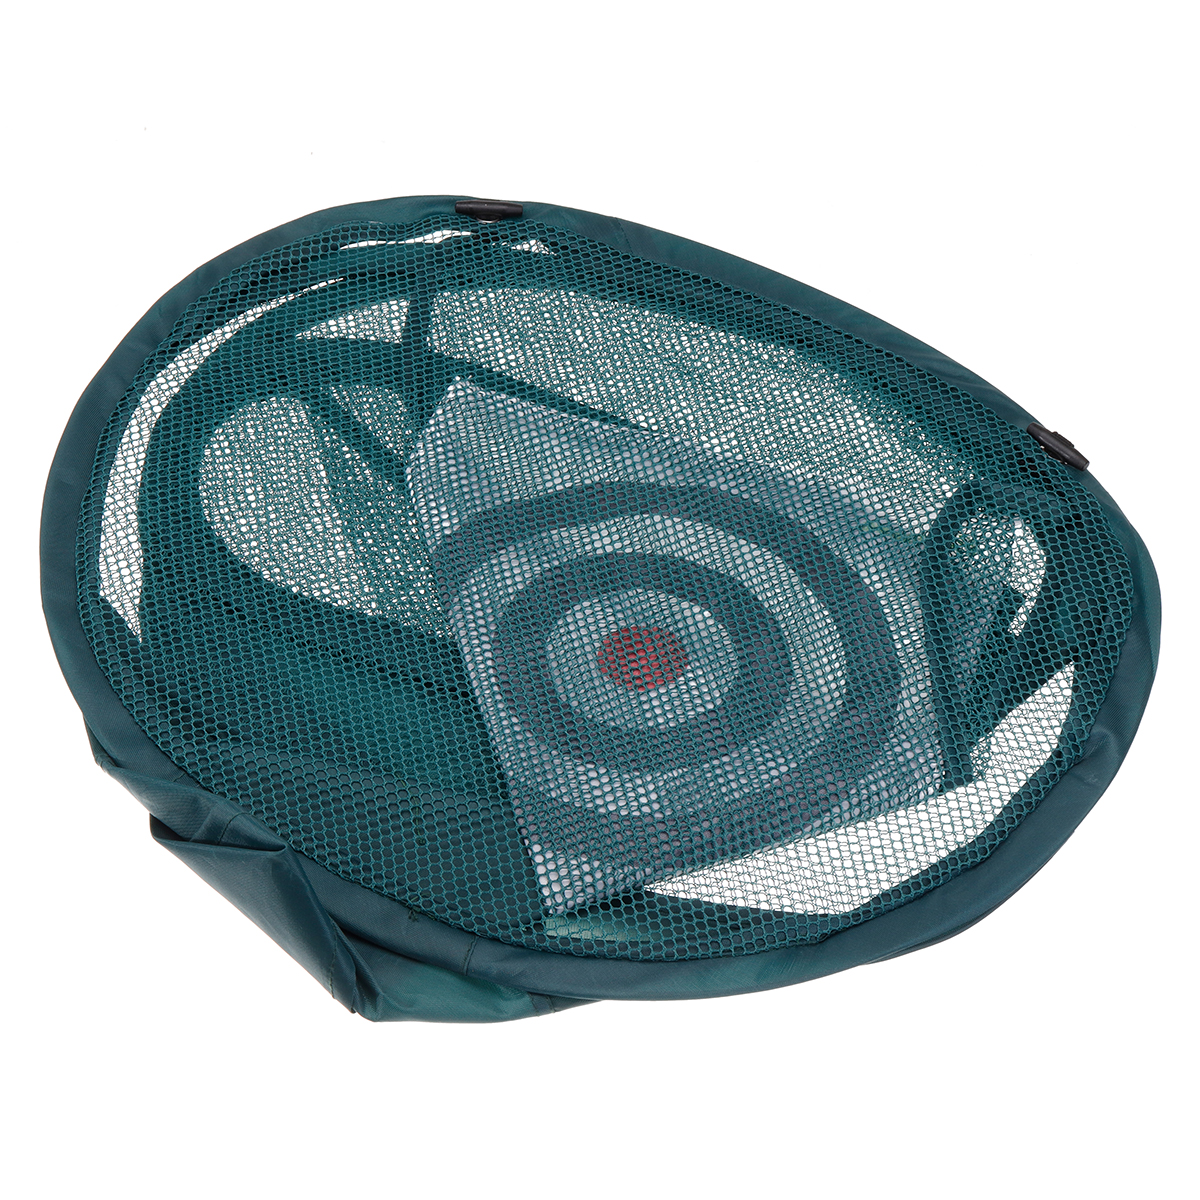 Foldable-Golf-Trainning-Net-Practice-Target-Net-With-Storage-Bag-Hitting-Cage-Indoor-Outdoor-Chippin-1656807-8